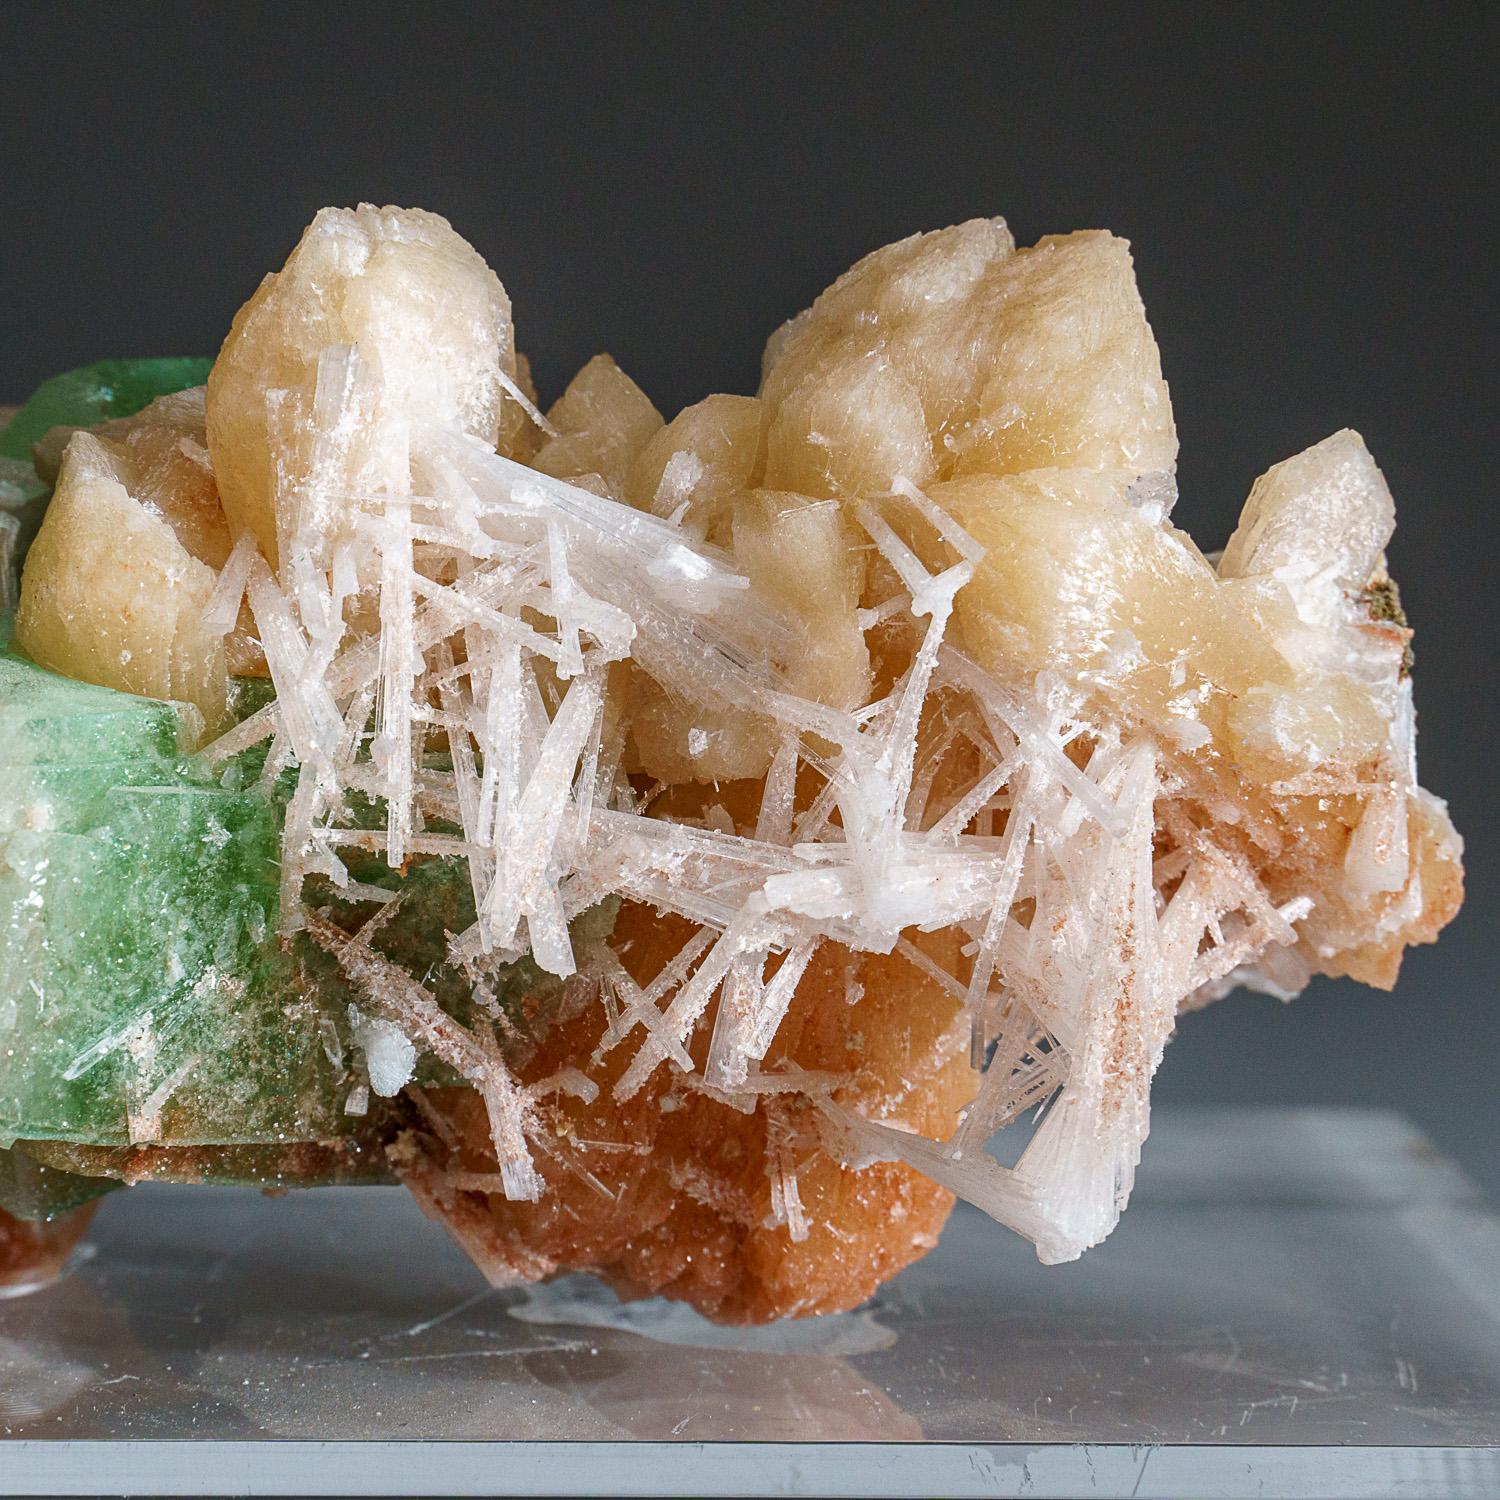 Crystal Apophylite and Stilbite with Scolecite from Lonavala Quarry, Pune District, Maha For Sale